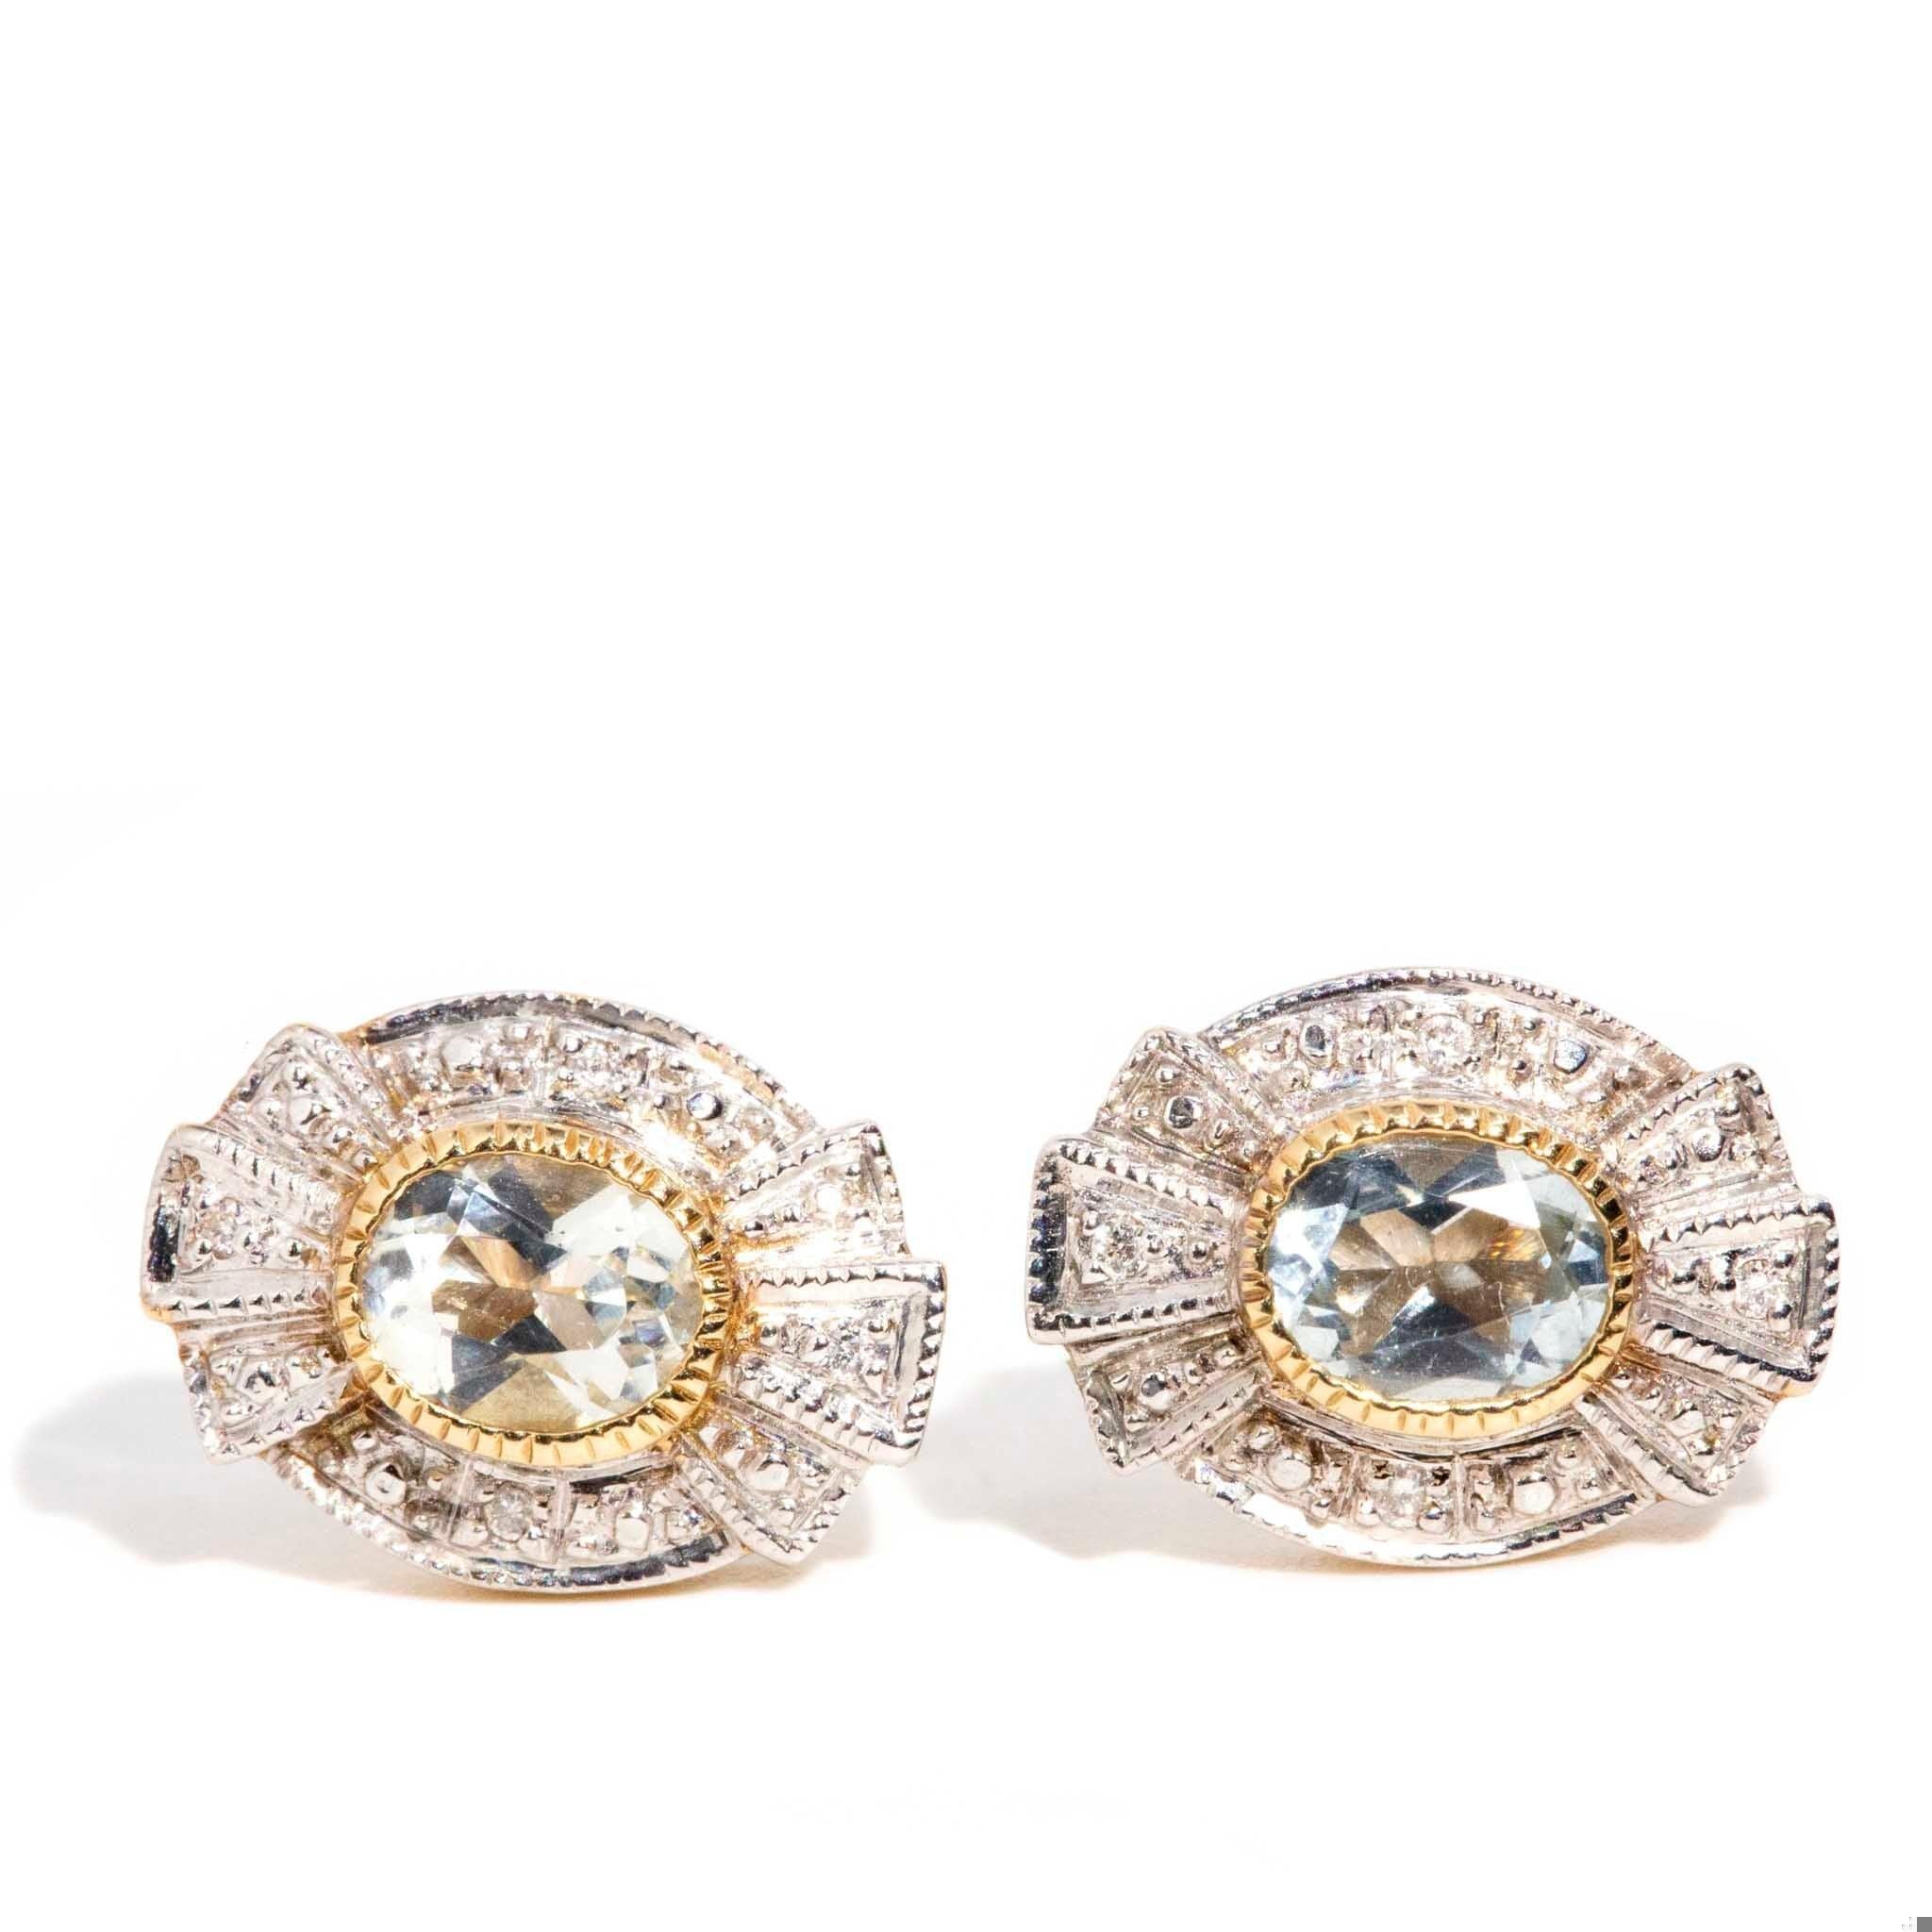 The Celeste Earrings are a grand celebration of shimmering diamonds and icy blue aquamarines. A monument to the decadence of cinemas Golden Age, the world is her stage and the curtain will rise as is her wont.

The Celeste Earrings Gem Details
The